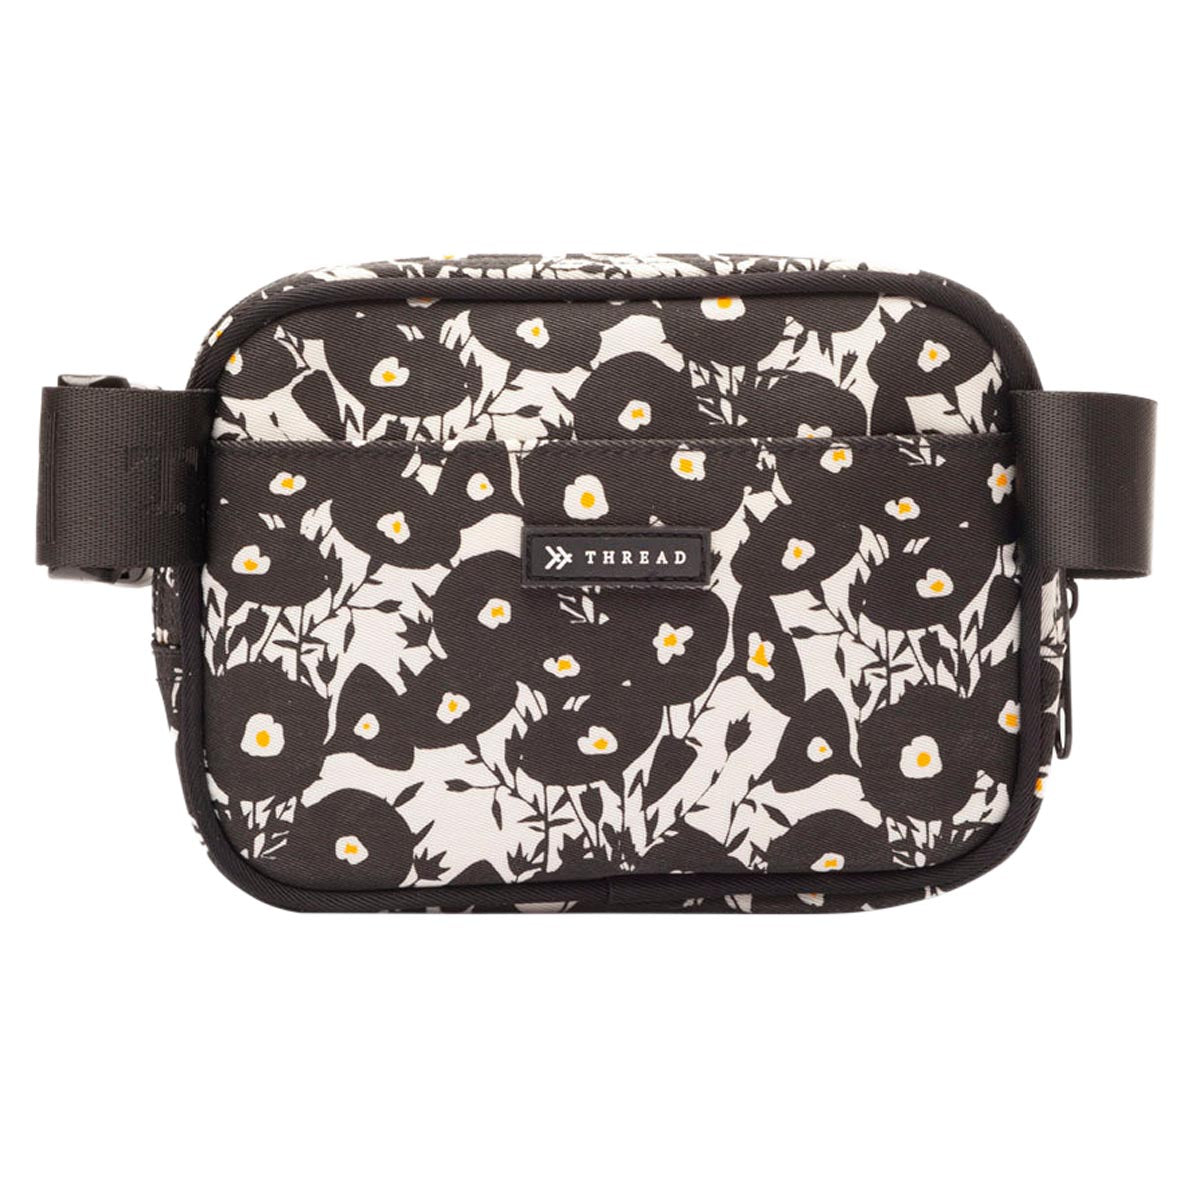 Thread Fanny Pack Bag - Colby image 2